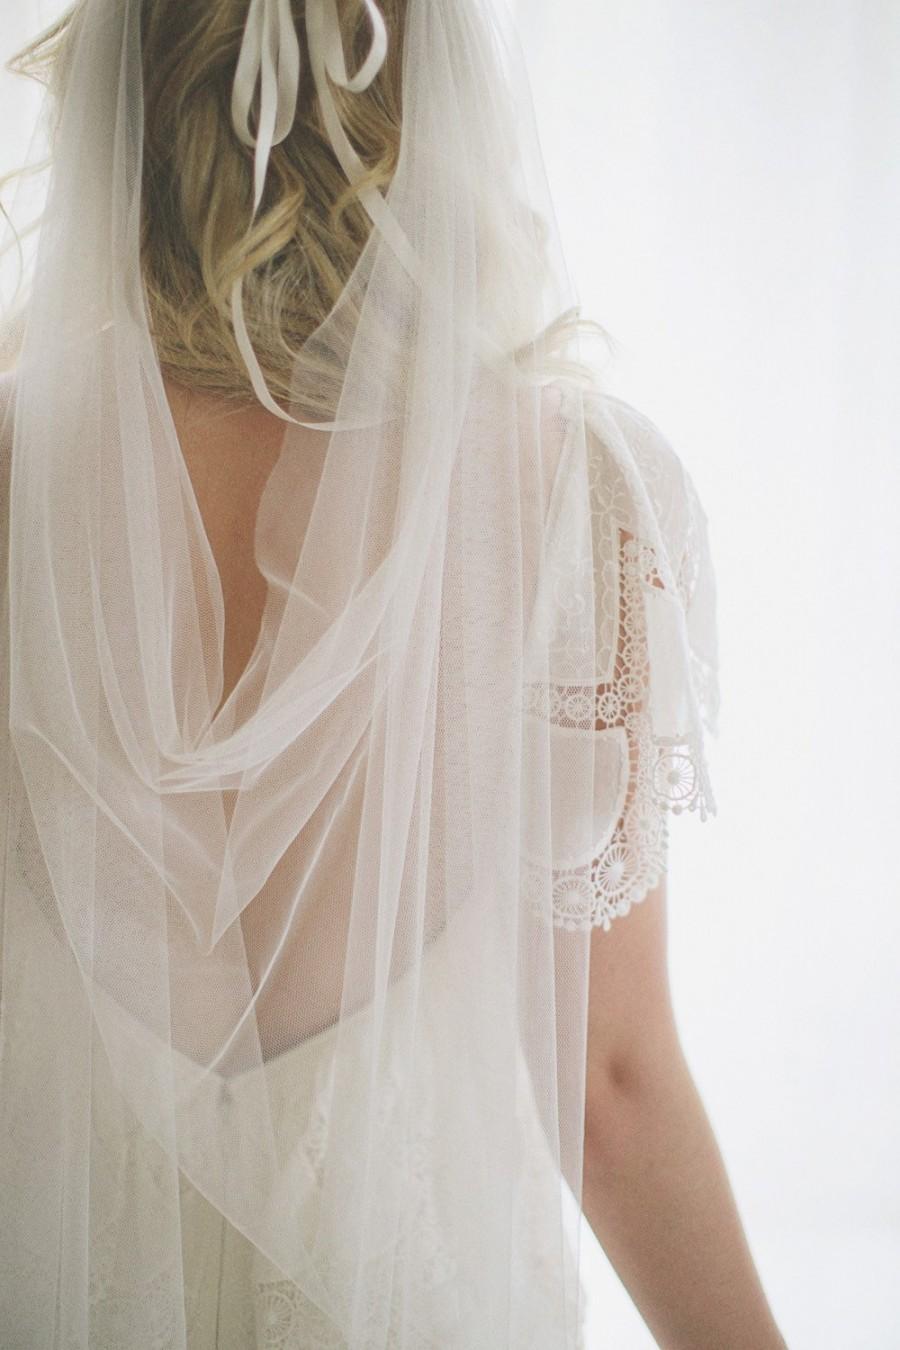 Wedding - Draped veil - SALE limited time only ! Marianna ivory veil, drape veil, tulle veil, wedding, bridal veil